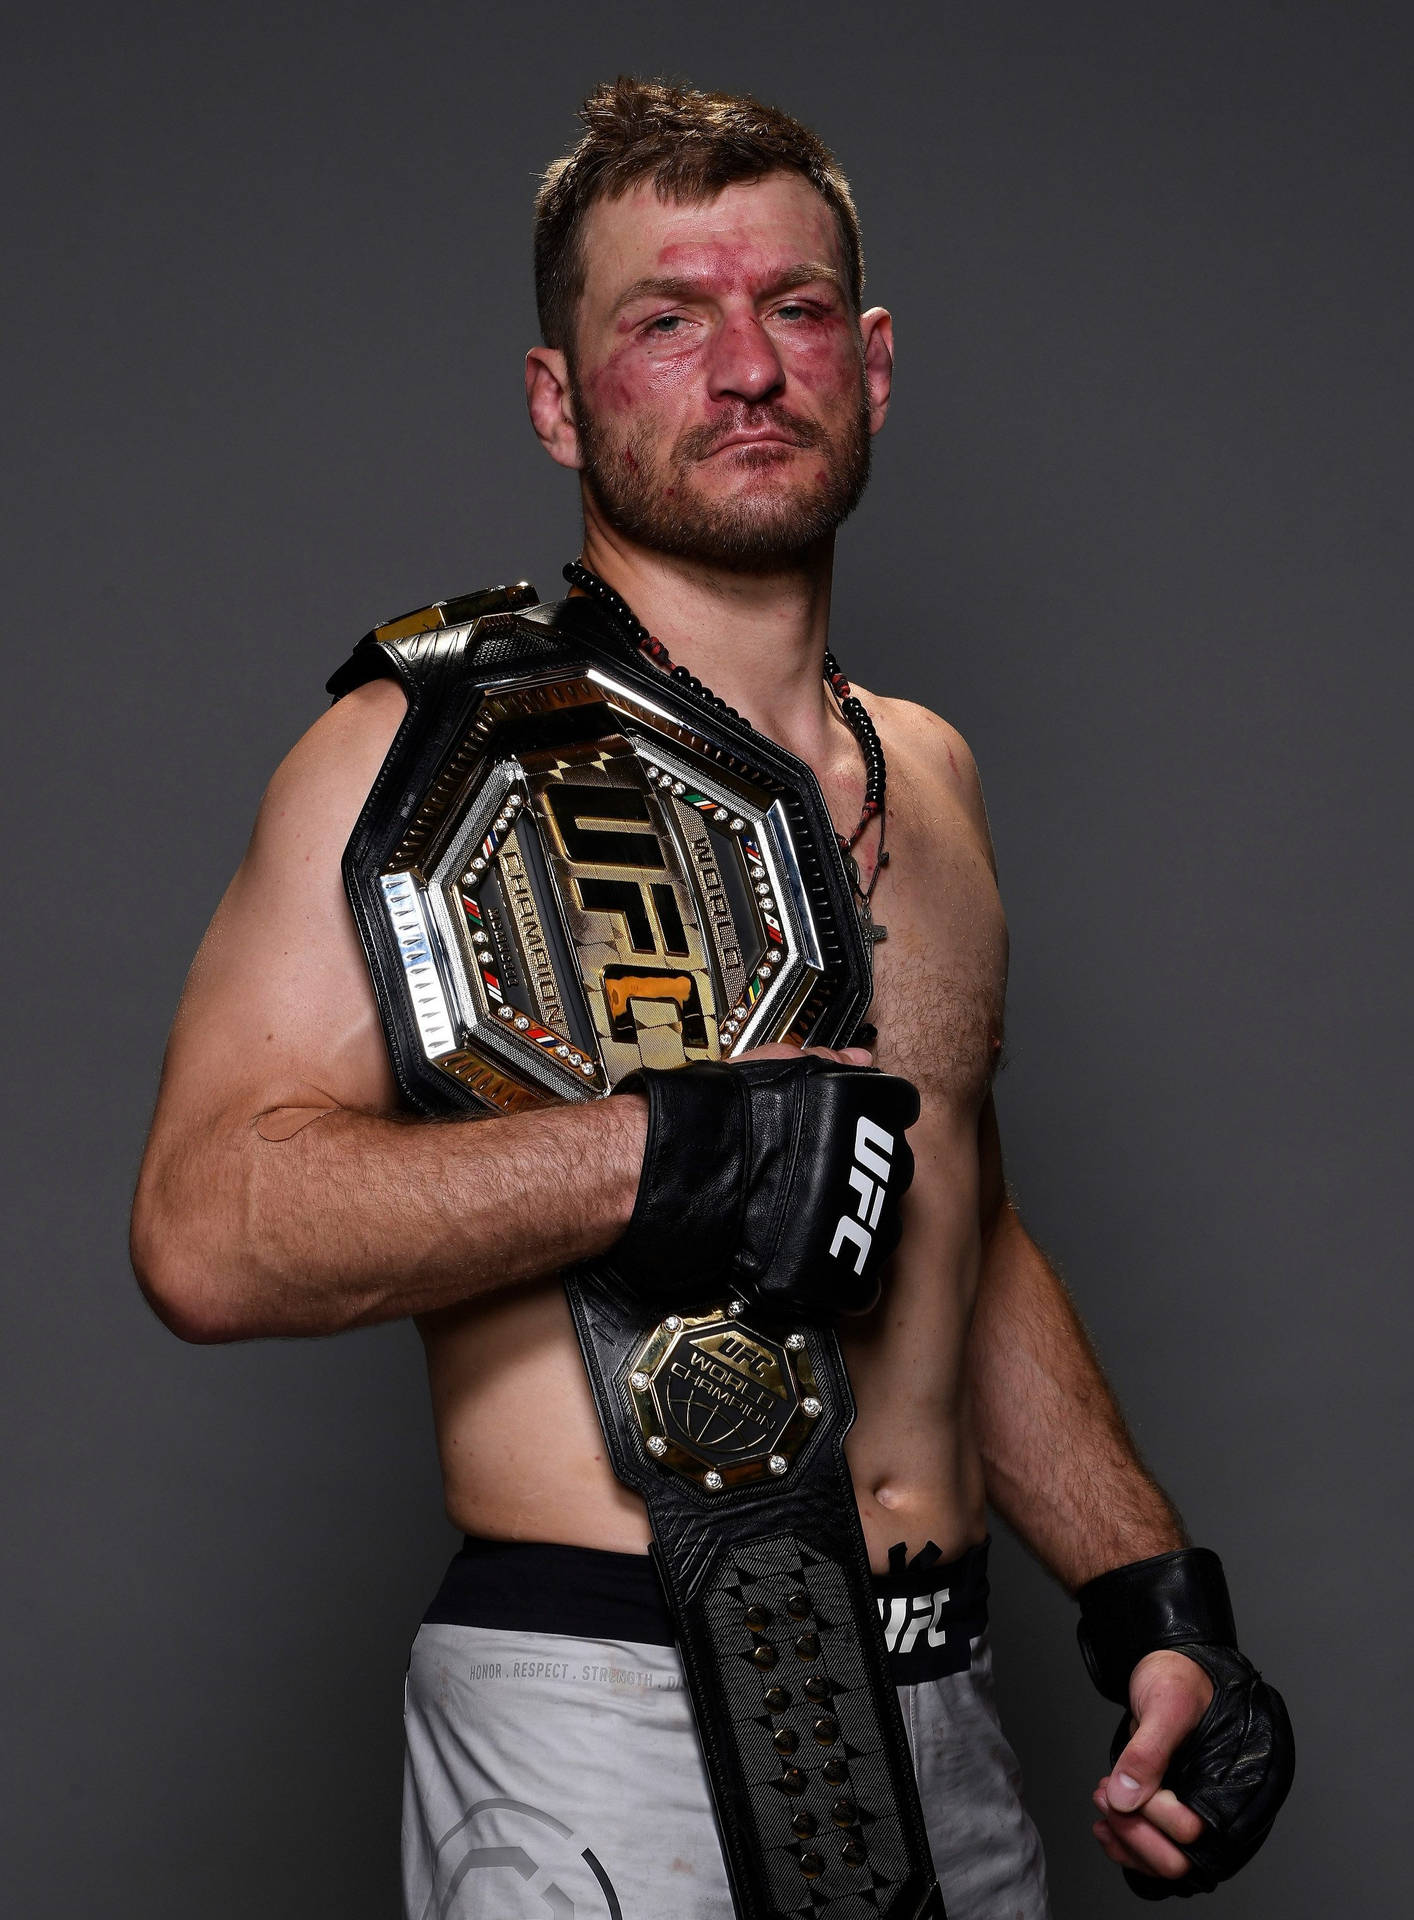 Stipe Miocic - Bloodied yet victorious, showcasing his championship belt Wallpaper